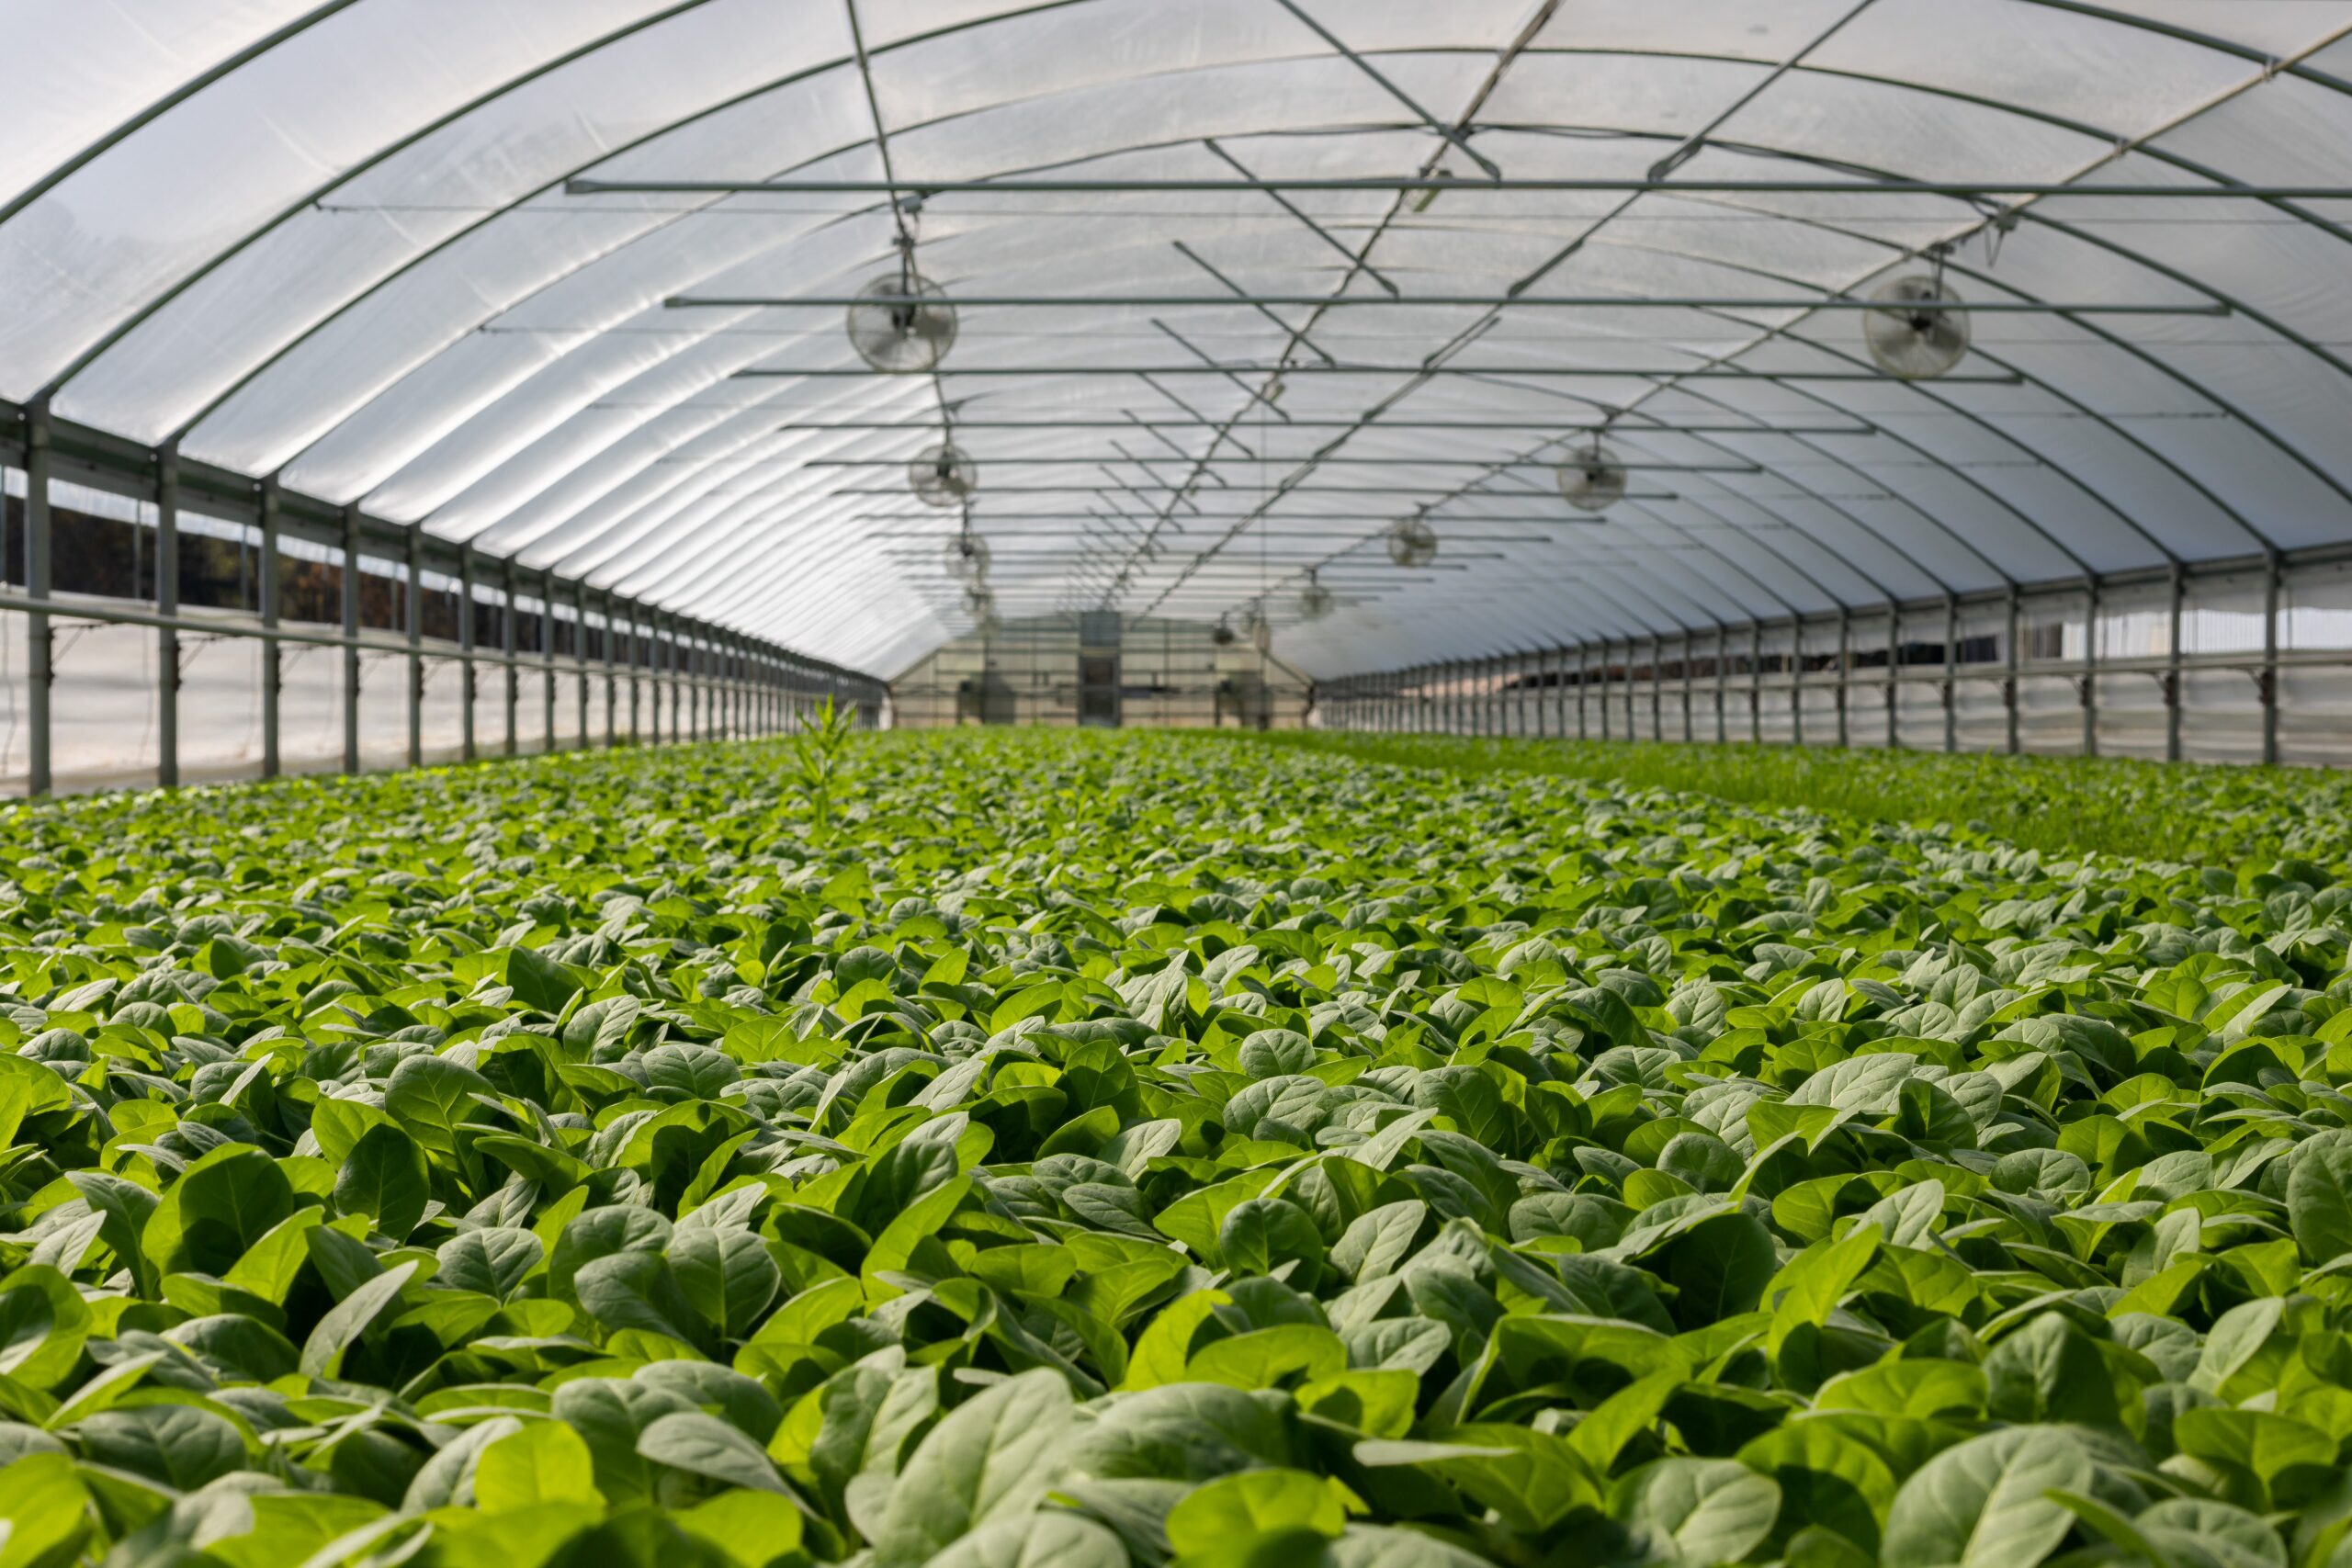 Here’s how CO2 GRO helps anyone in the business of building greenhouses